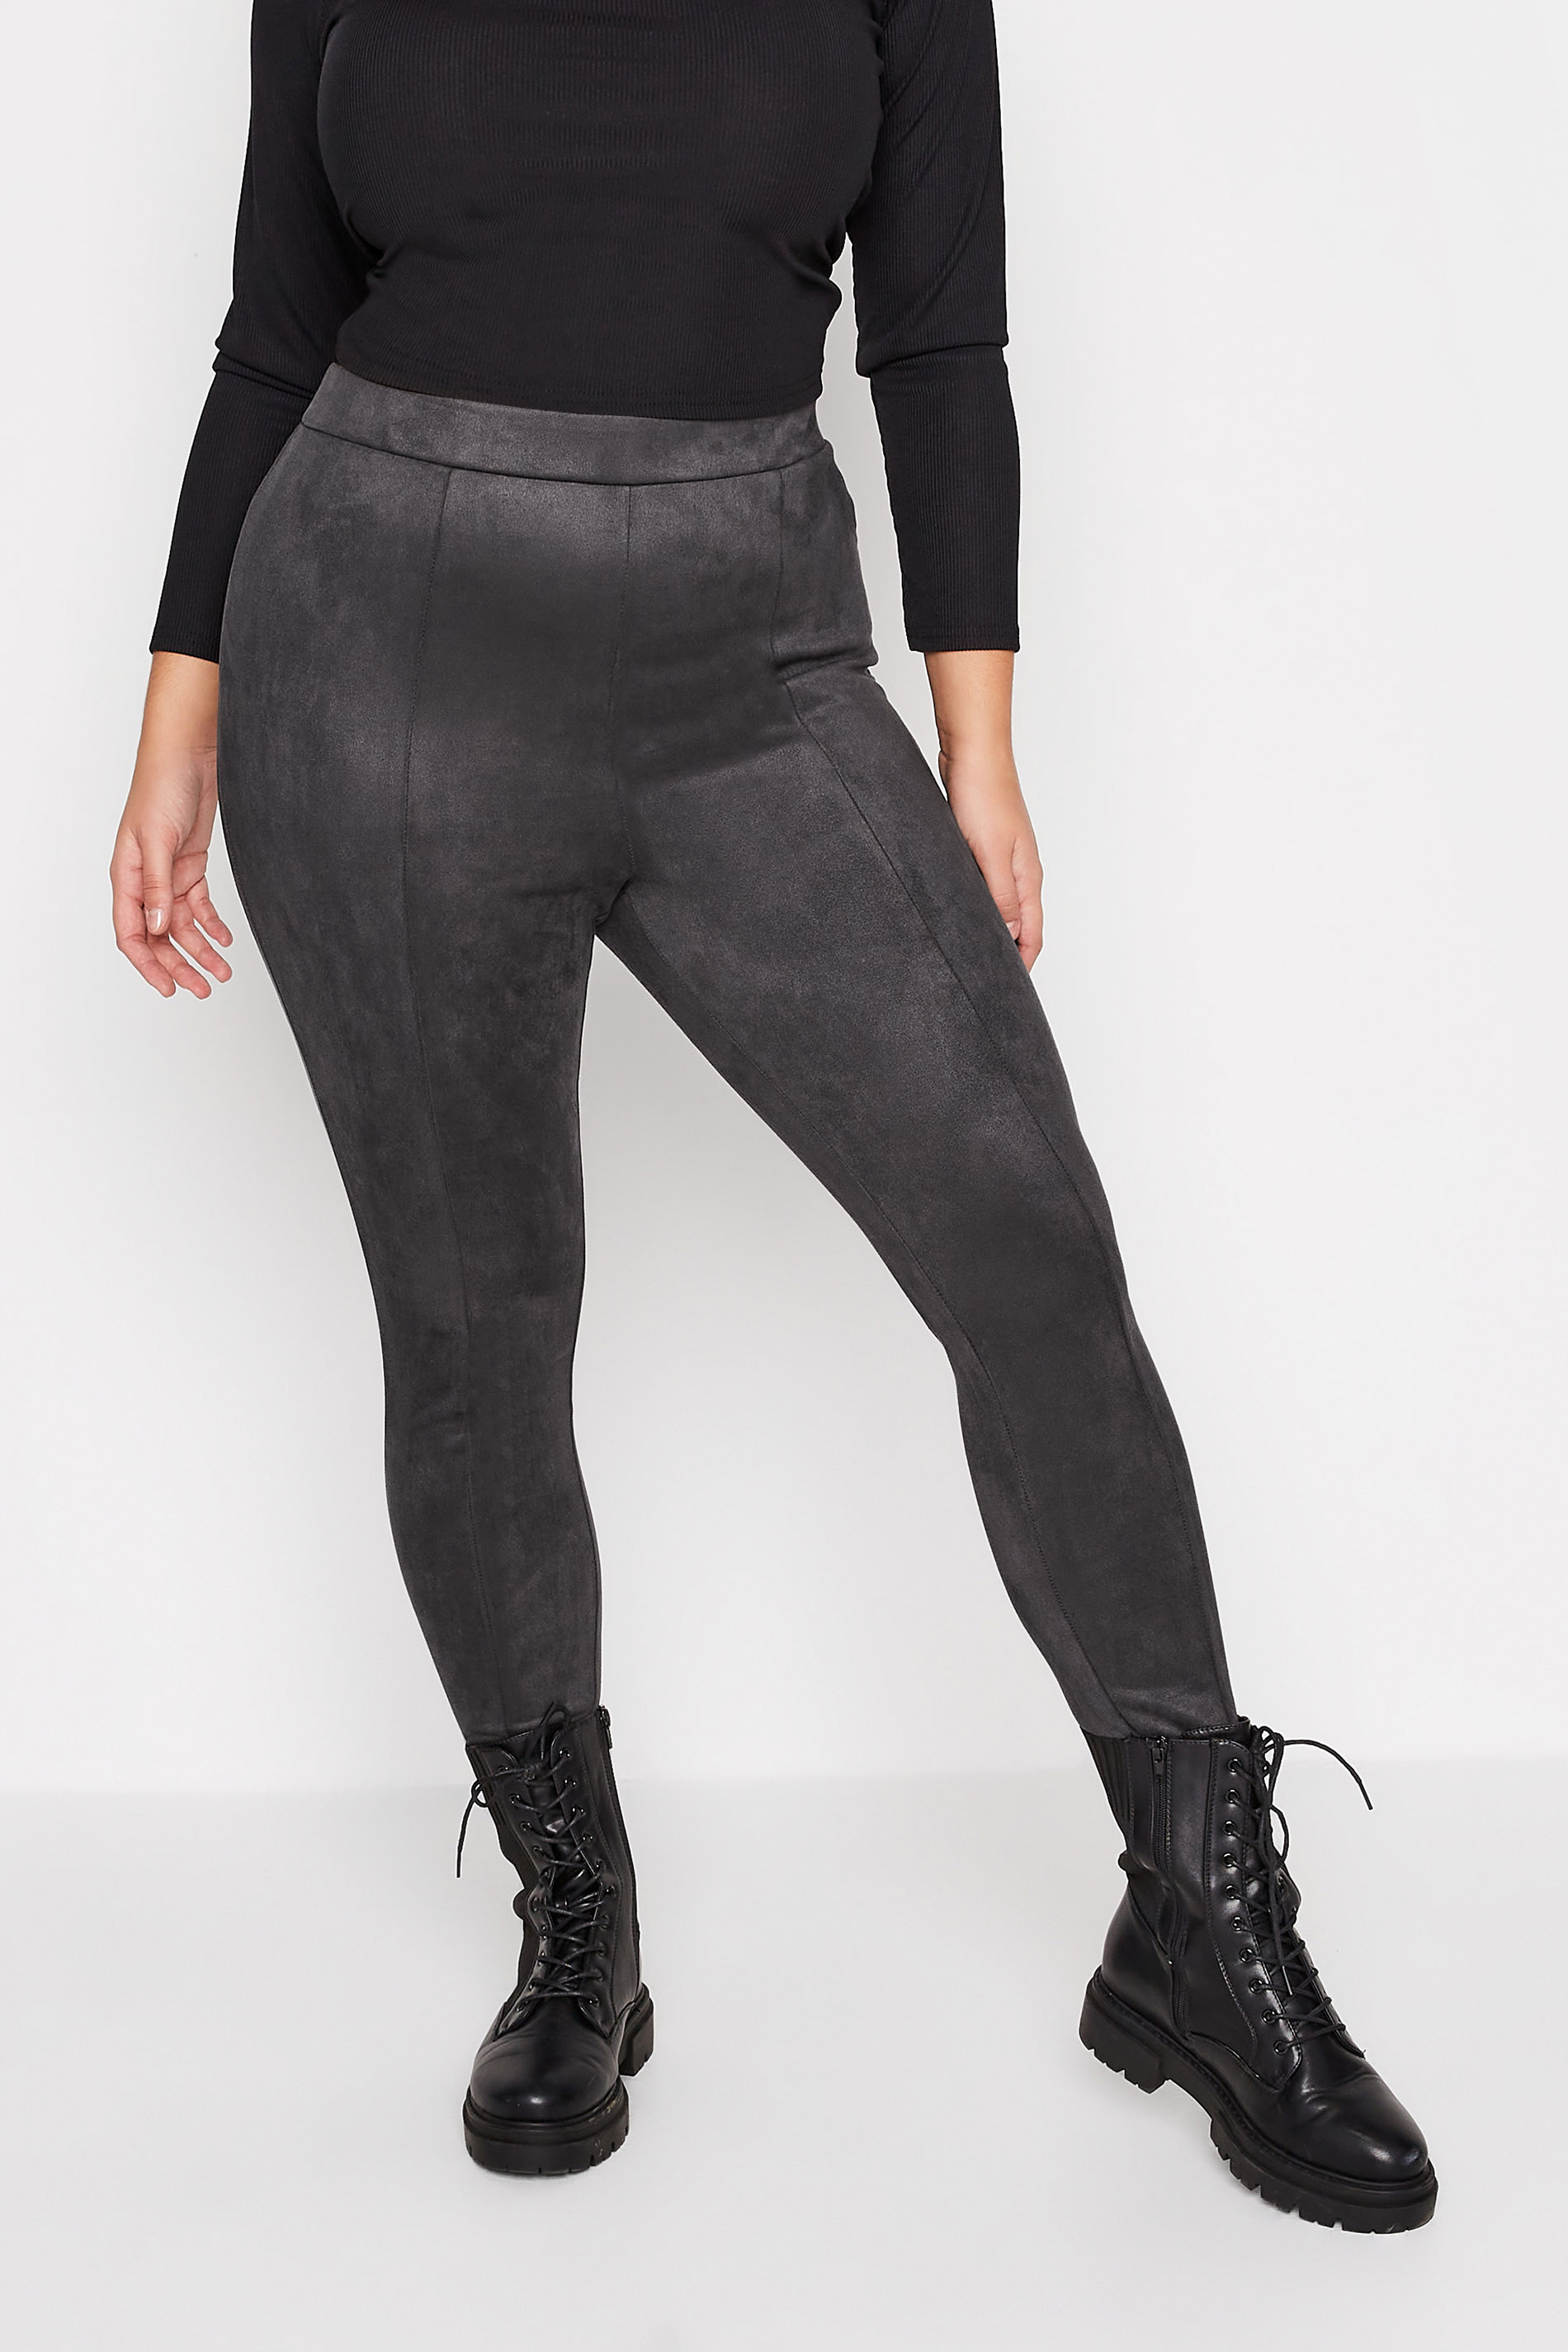 Plus Size Charcoal Grey Faux Suede High Waisted Leggings | Yours Clothing 1